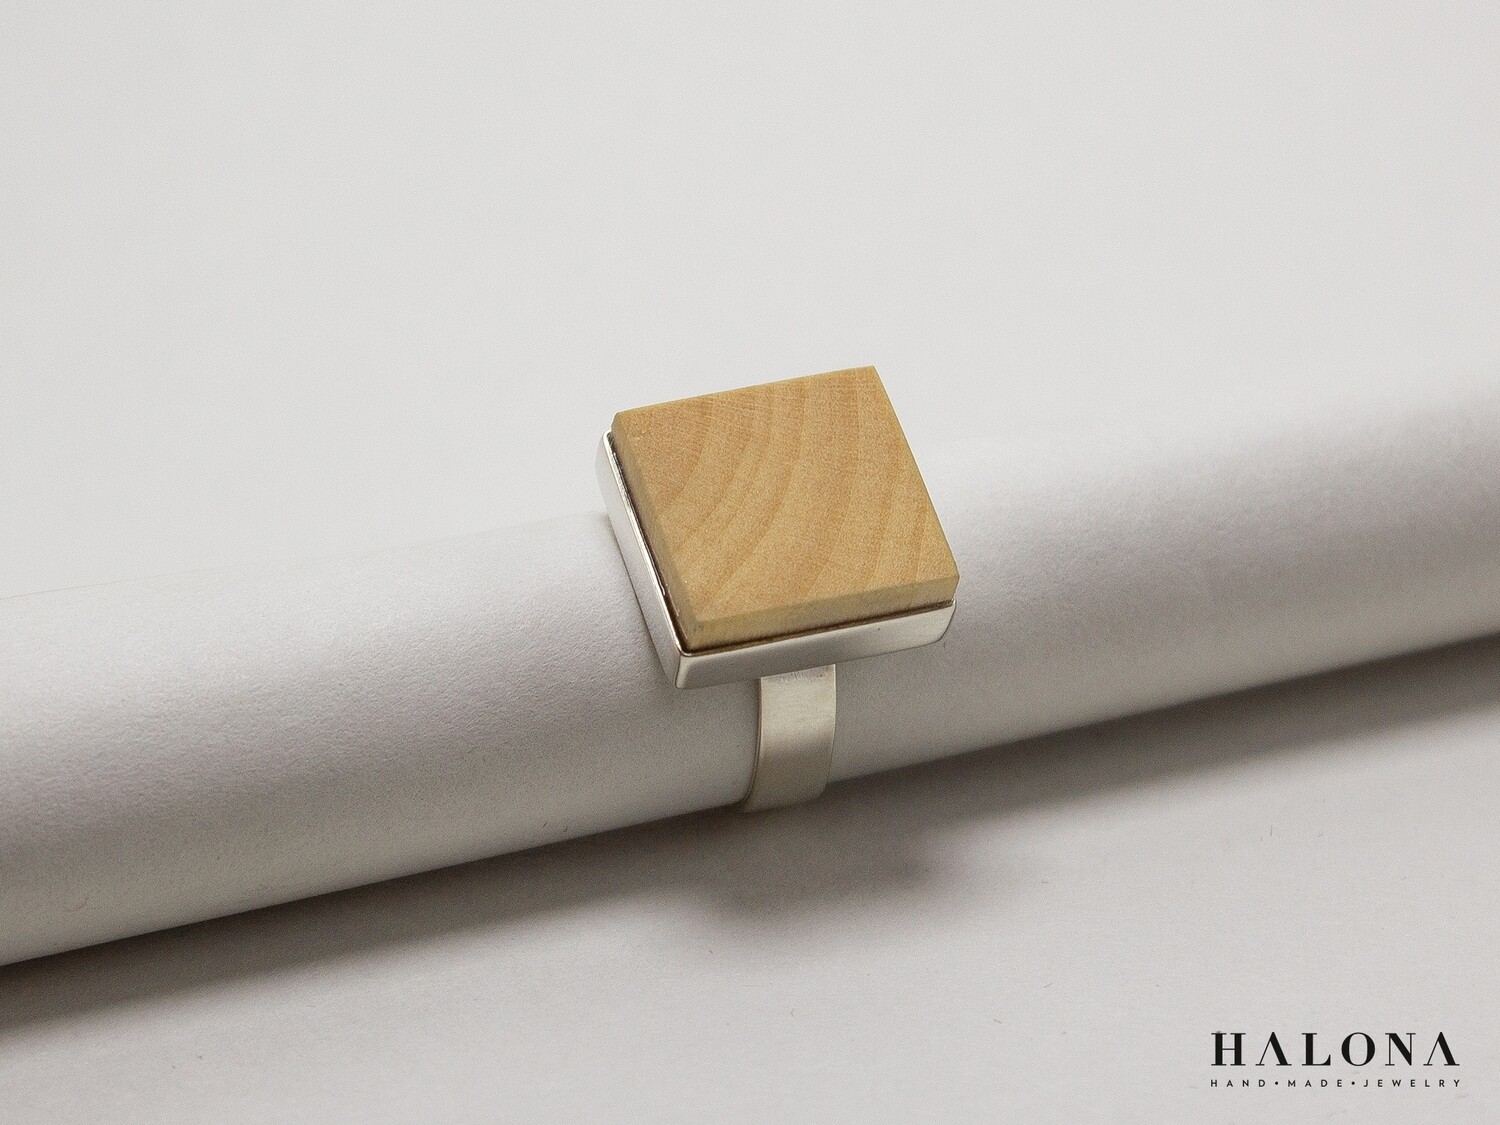 Handmade modern silver and wood ring.